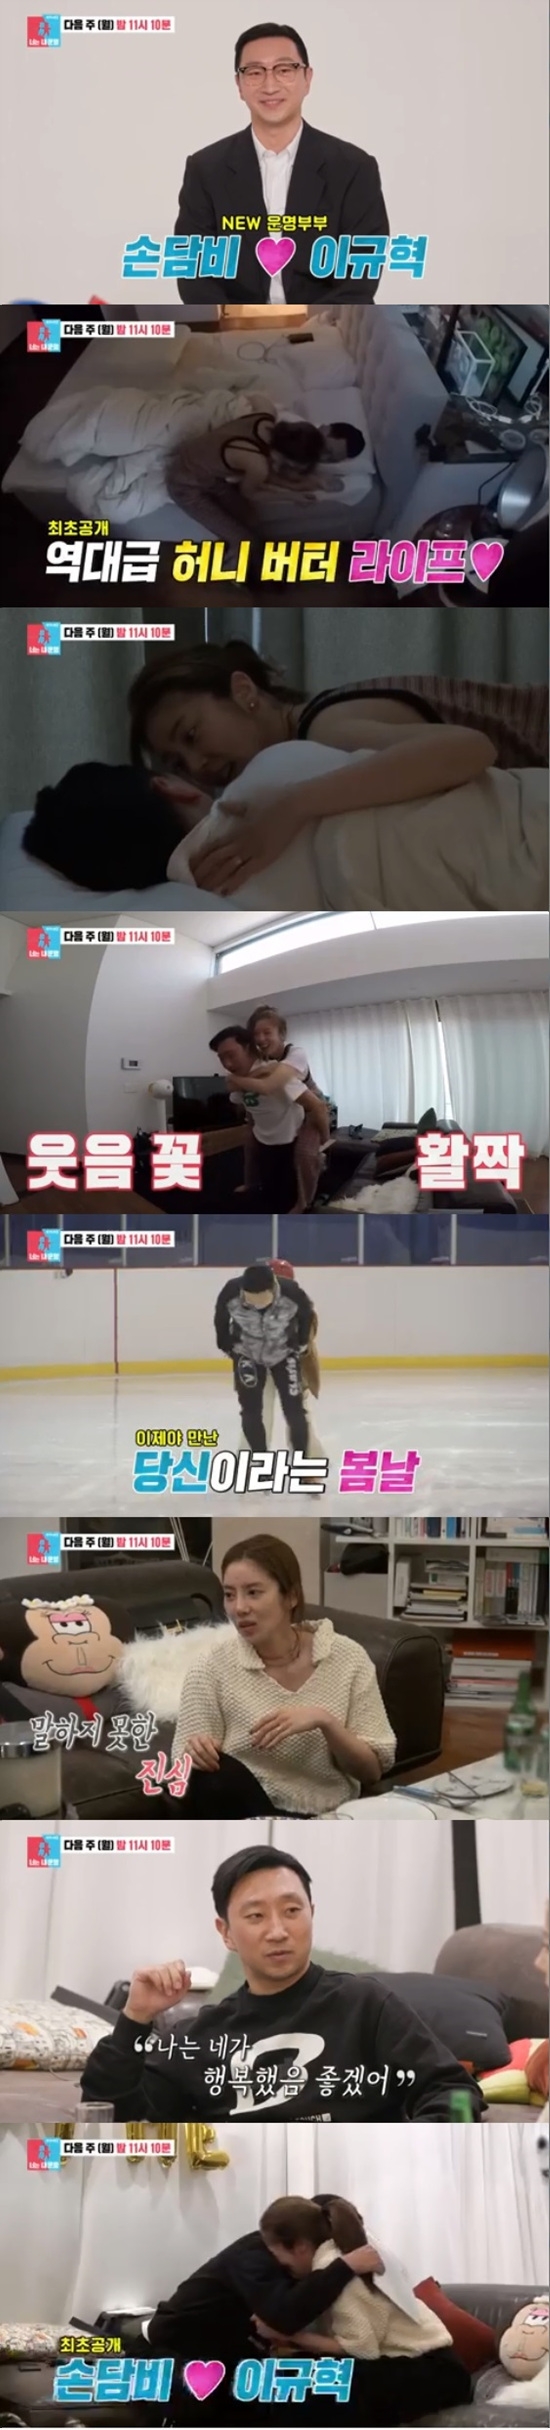 Son Dam-bi and Lee Kyou-hyuk have signalled the release of their honeymoon.On the 2nd, SBS Same Bed, Different Dreams 2: You Are My Dest - You Are My Destiny attracted attention with the release of a trailer of Son Dam-bi - Lee Kyou-hyuk, who joined the new fate couple.At the end of the broadcast, a preview video showing Son Dam-bi and Lee Kyou-hyuk was released.Son Dam-bi and Lee Kyou-hyuk have gathered topics since announcing their marriage immediately after admitting their devotion in December last year.The two of them once again focused on the news of the appearance of Same Bed, Different Dreams 2 ahead of the wedding ceremony on May 13th.Son Dam-bi appeared in a colored dress in an interview with the production team and shyly introduced himself as Son Dam-bi, a bride-to-be who is about to marry in May.Lee Kyou-hyuk, who came out in a neat suit, also introduced the prospective groom Lee Kyou-hyuk.Son Dam-bi and Lee Kyou-hyuk soon showed off the sweetness of the prospective couple as they were about to get married.Son Dam-bi kissed Lee Kyou-hyuk, who was lying in bed, and said Good Morning with a charming voice.Lee Kyou-hyuk carried such a Son Dam-bi and walked around the living room and asked, Is that good?Son Dam-bi was completely happy and stuck to Lee Kyou-hyuks back.Son Dam-bi and Lee Kyou-hyuk were also seen enjoying a skating rink date.Son Dam-bi skated in a helmet and reliant on Lee Kyou-hyuk.Lee Kyou-hyuk was holding hands in front and pulling Son Dam-bi, who shouted Its so fun for the jackpot, brother.Son Dam-bi and Lee Kyou-hyuk have also talked about each others sincerity that they have not said before.Son Dam-bi said, I love and like my brother so much while watching him, but I do not think the things that were okay, okay were okay.Lee Kyou-hyuk told Son Dam-bi, I want you to be happy, happy because of me, happy to be with us. You dont have to try.I can try, he said.Theres so much tears, Son Dam-bi said, tearing his face red, so much tears, Lee Kyou-hyuk said, when Son Dam-bis tears were not going to stop.I am sad when you cry, he said, hugging Son Dam-bi.Photo: SBS broadcast screen